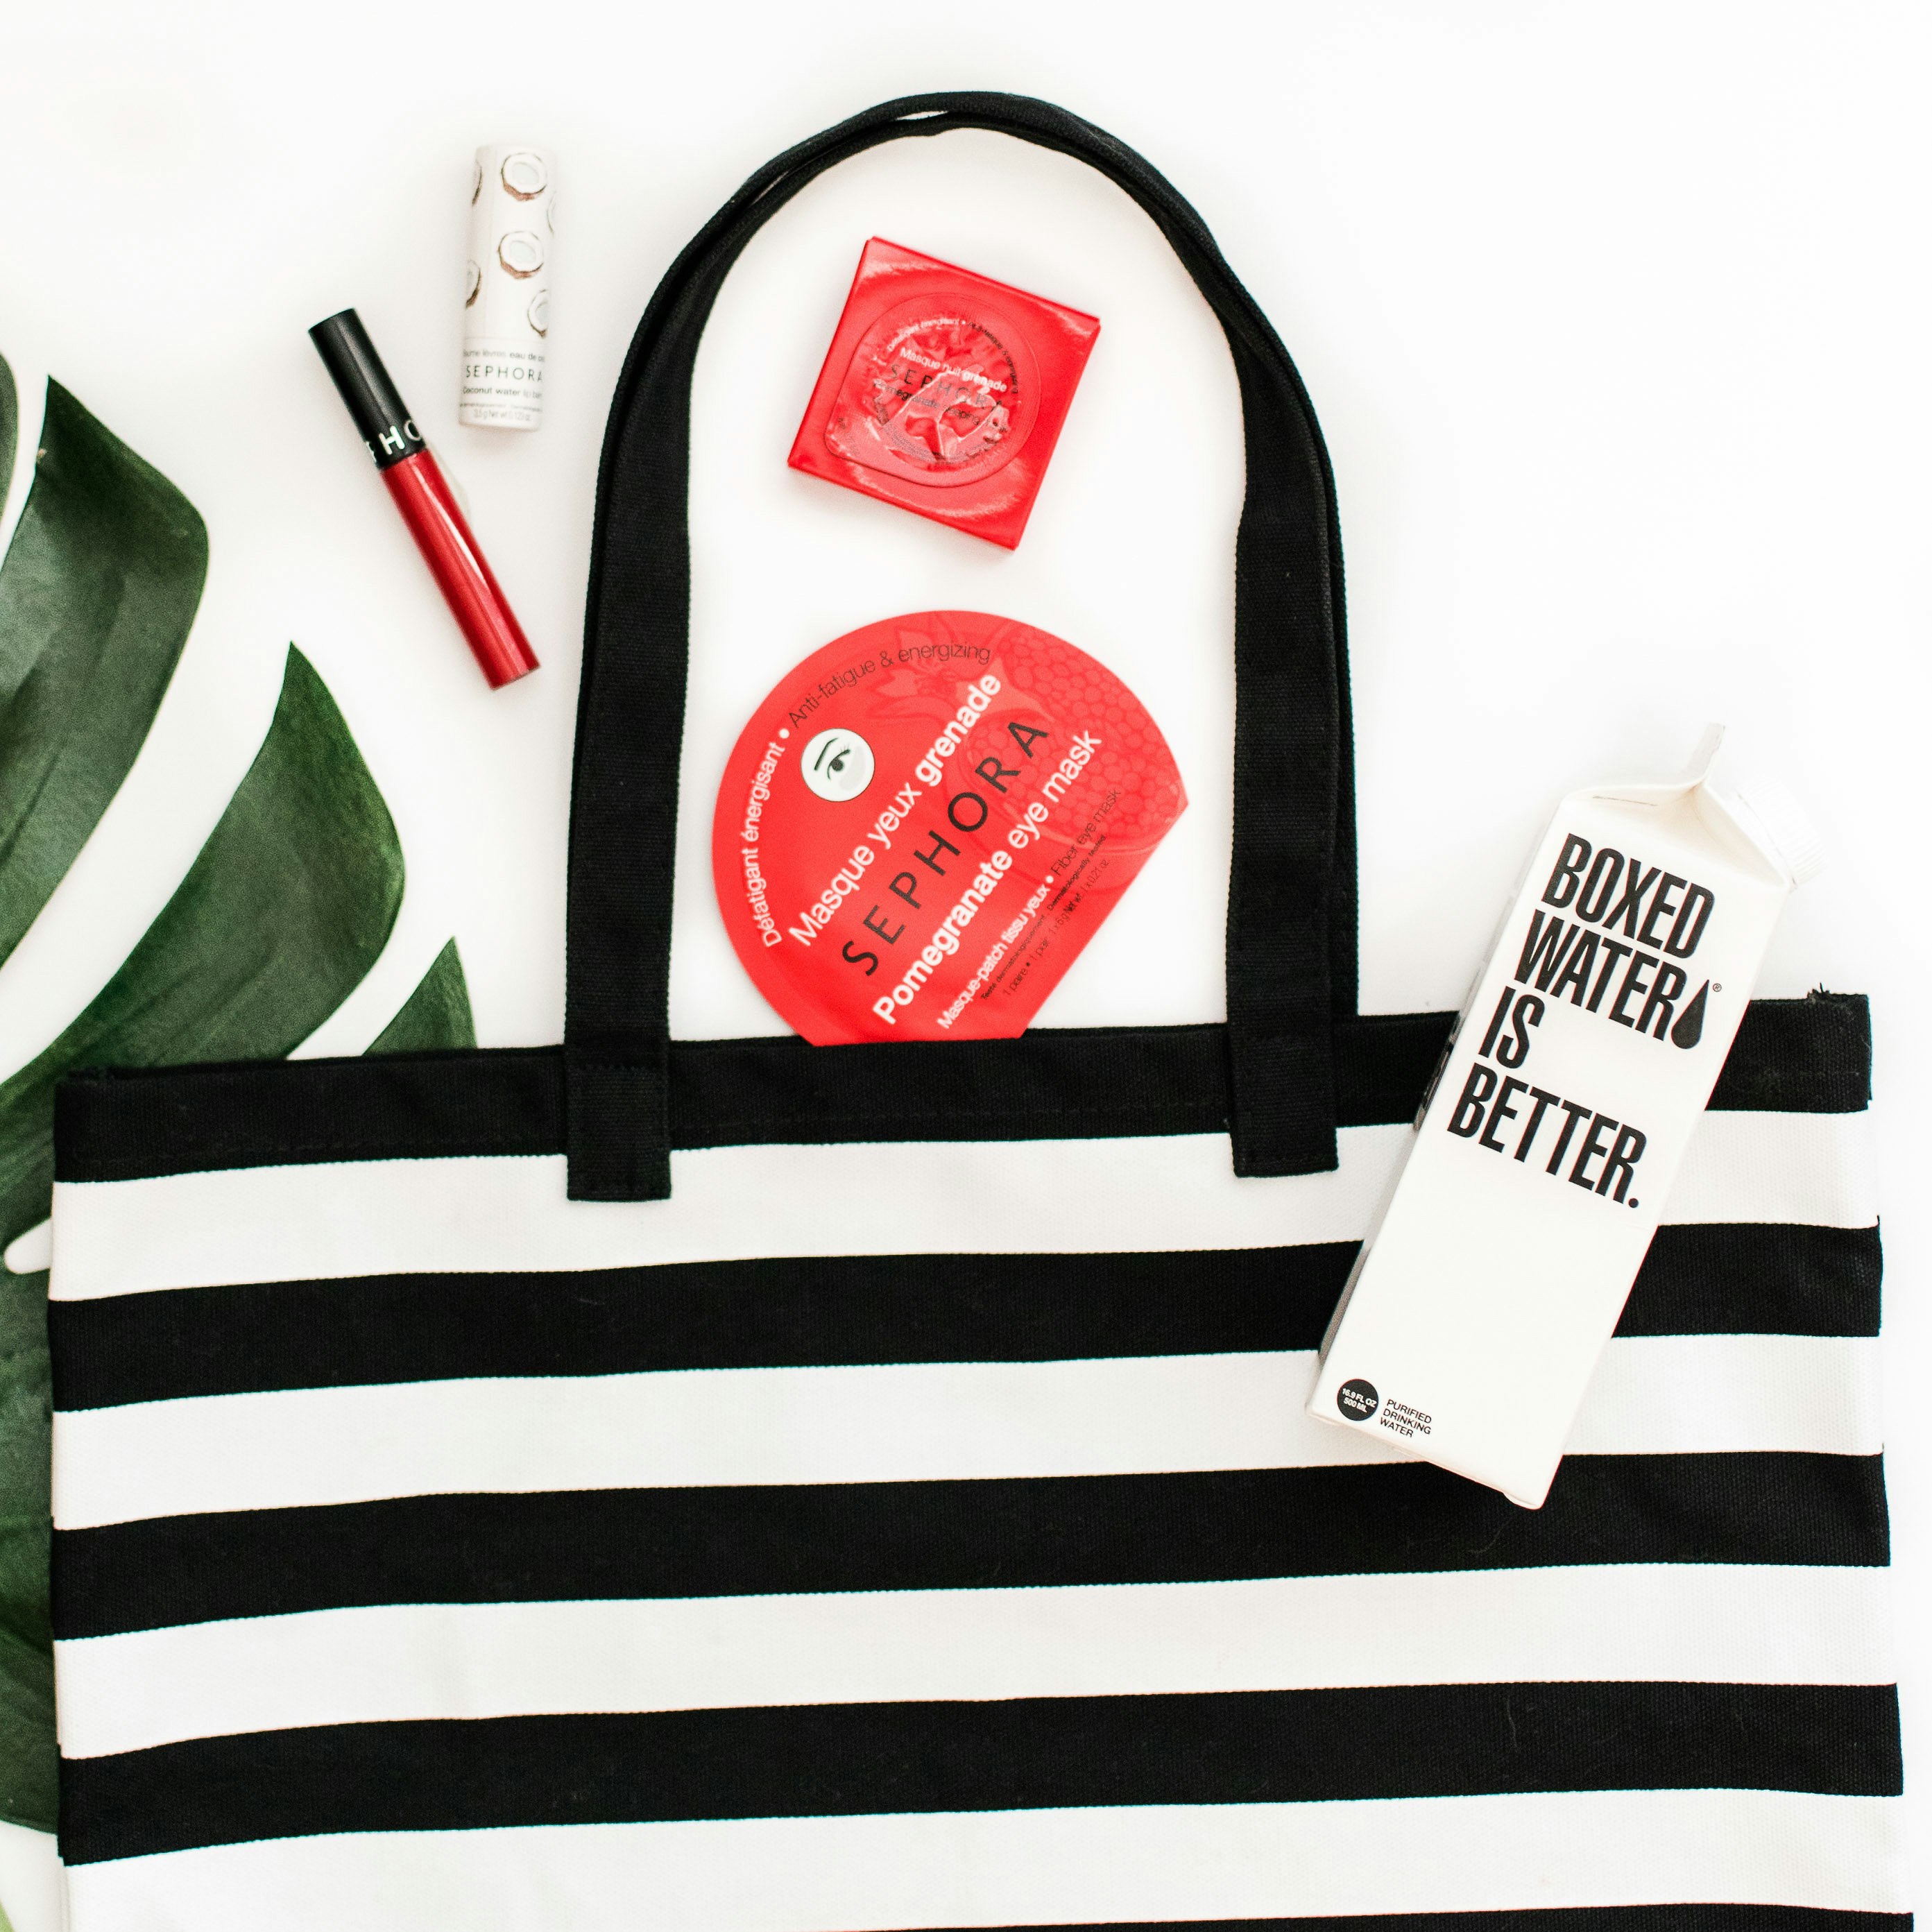 A black and white striped handbag with Sephora and Boxed Water products displayed next to it